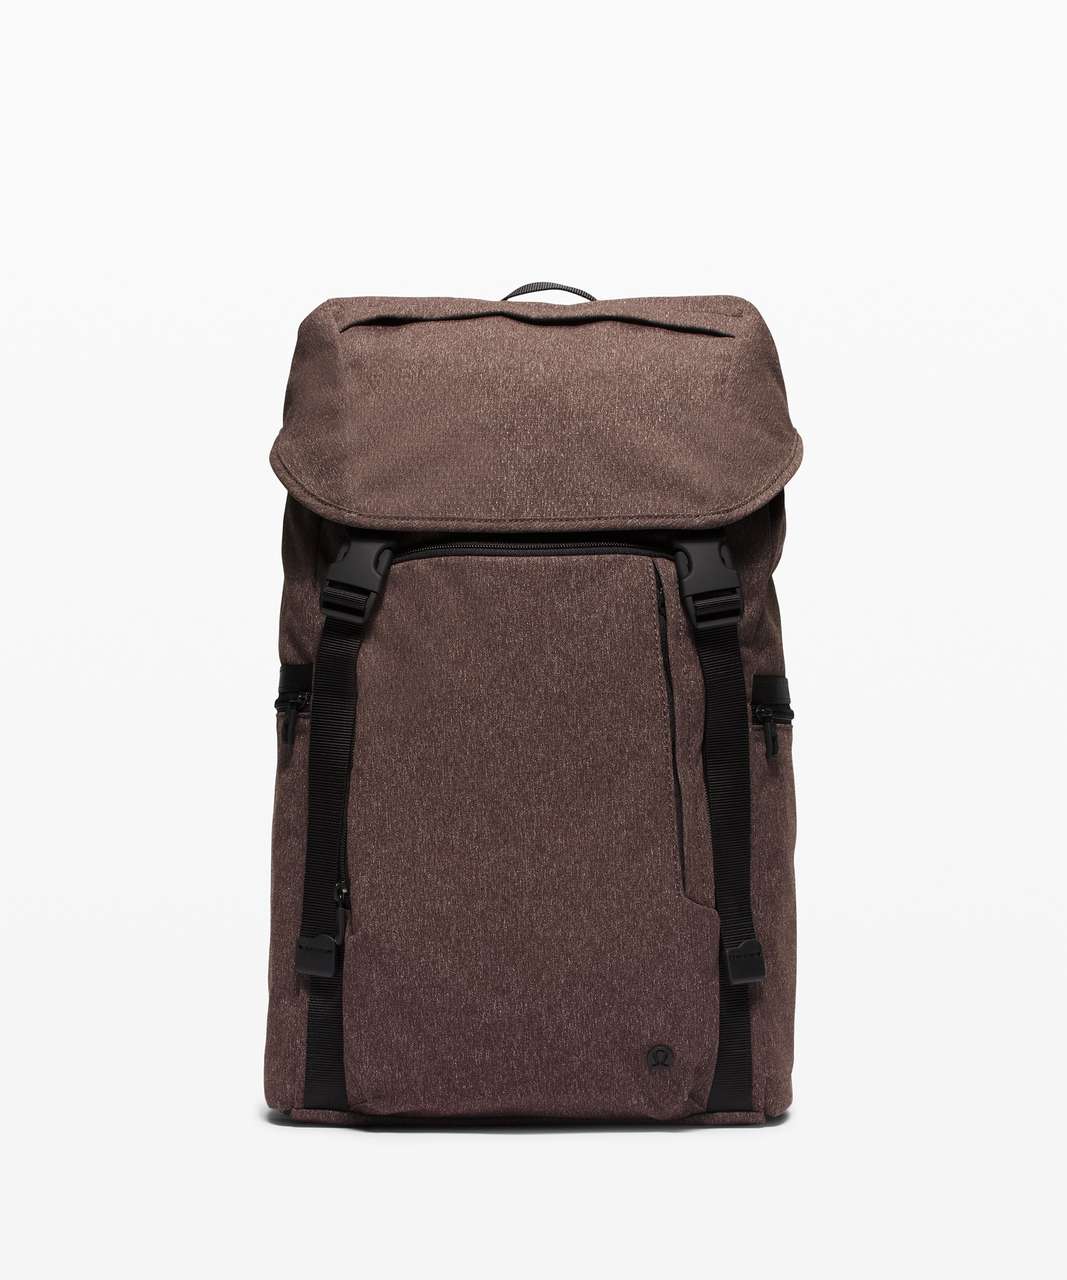 Lululemon Command The Day Backpack *24L - Heathered French Press